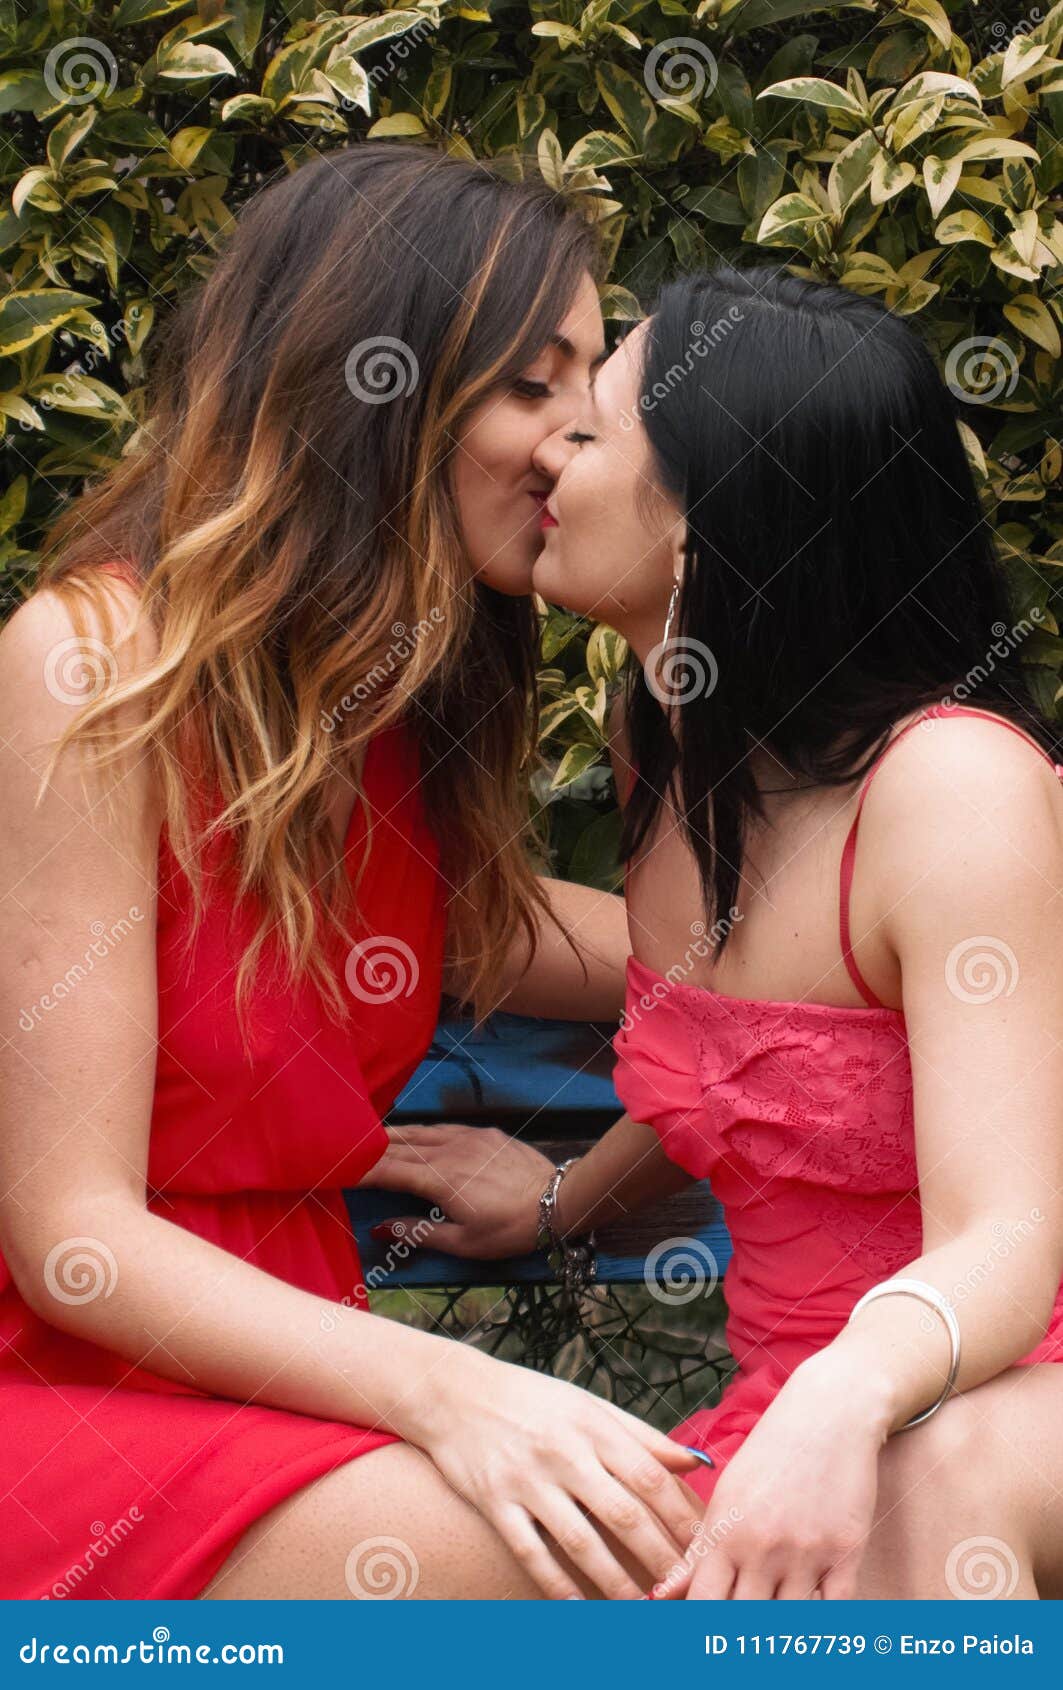 Kiss Between Two Young Women Girls With Sensual